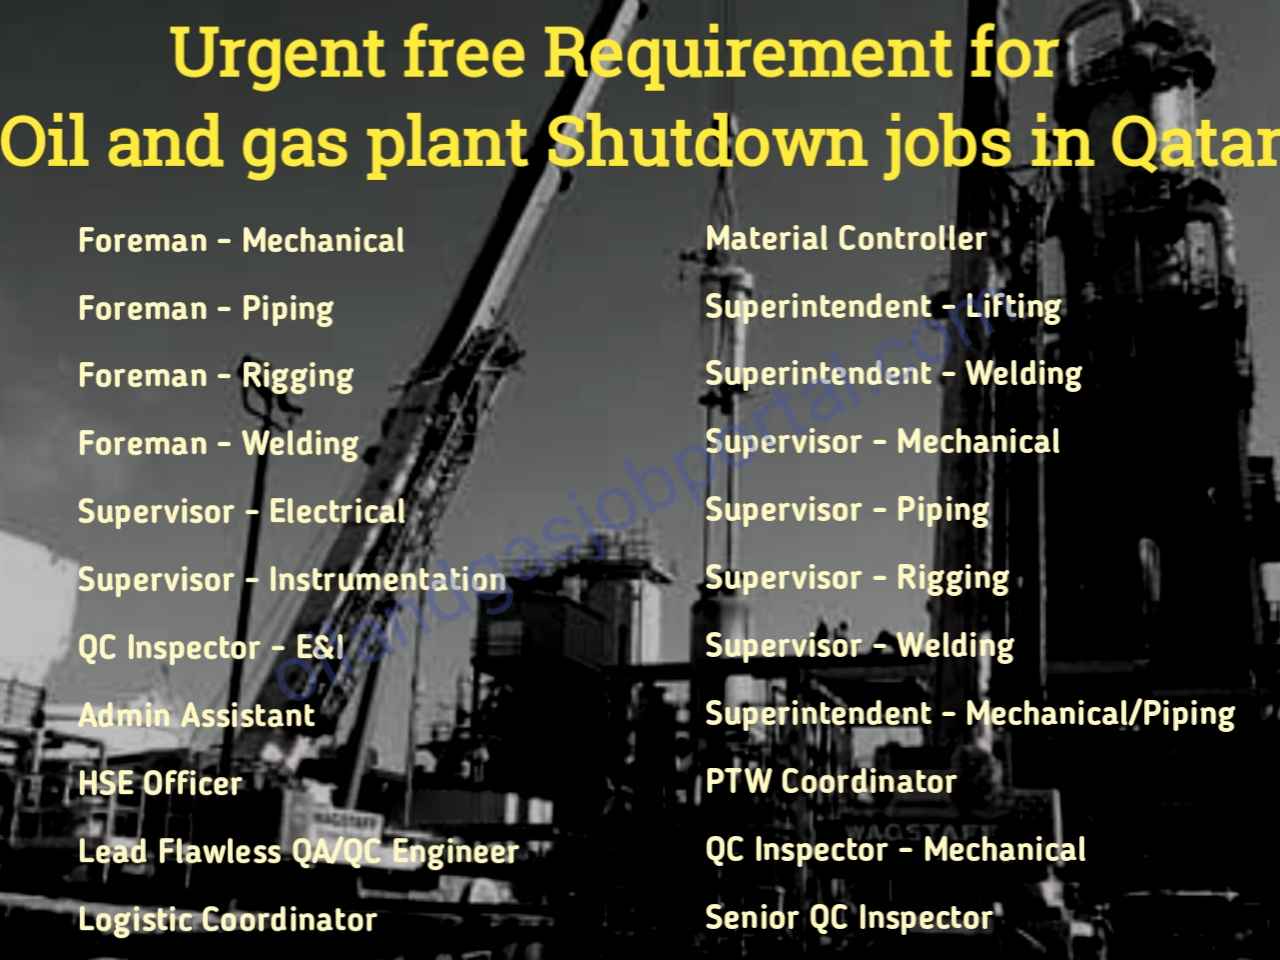 Urgent free Requirement for Oil and gas plant Shutdown jobs in Qatar